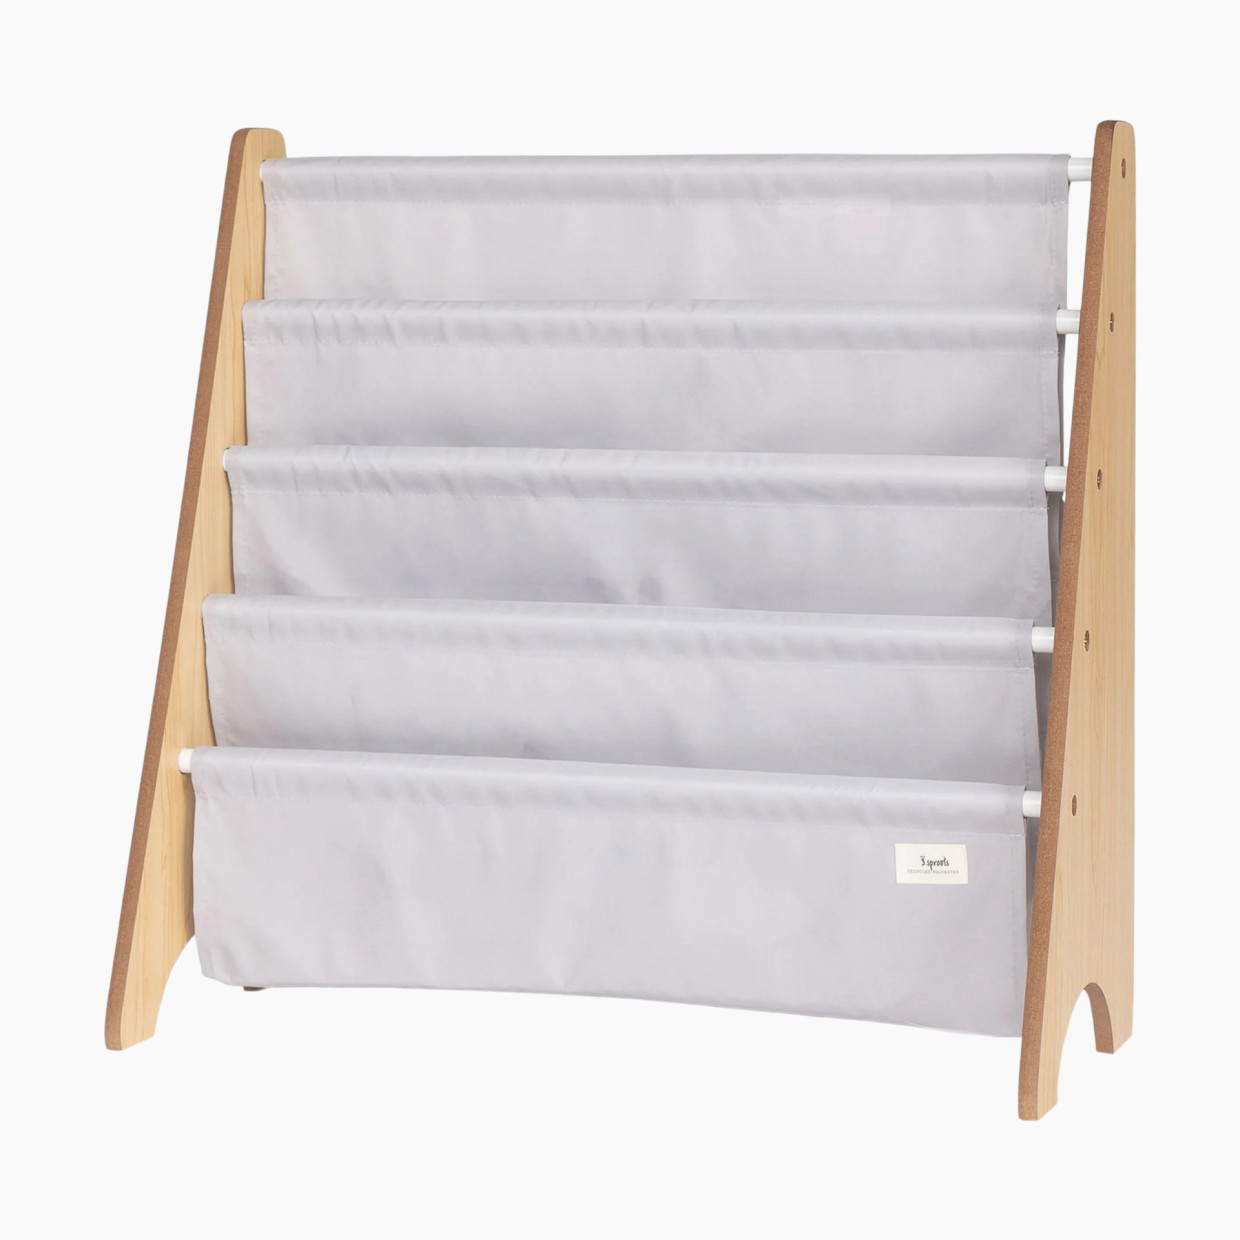 3 Sprouts Recycled Book Rack - Light Grey.